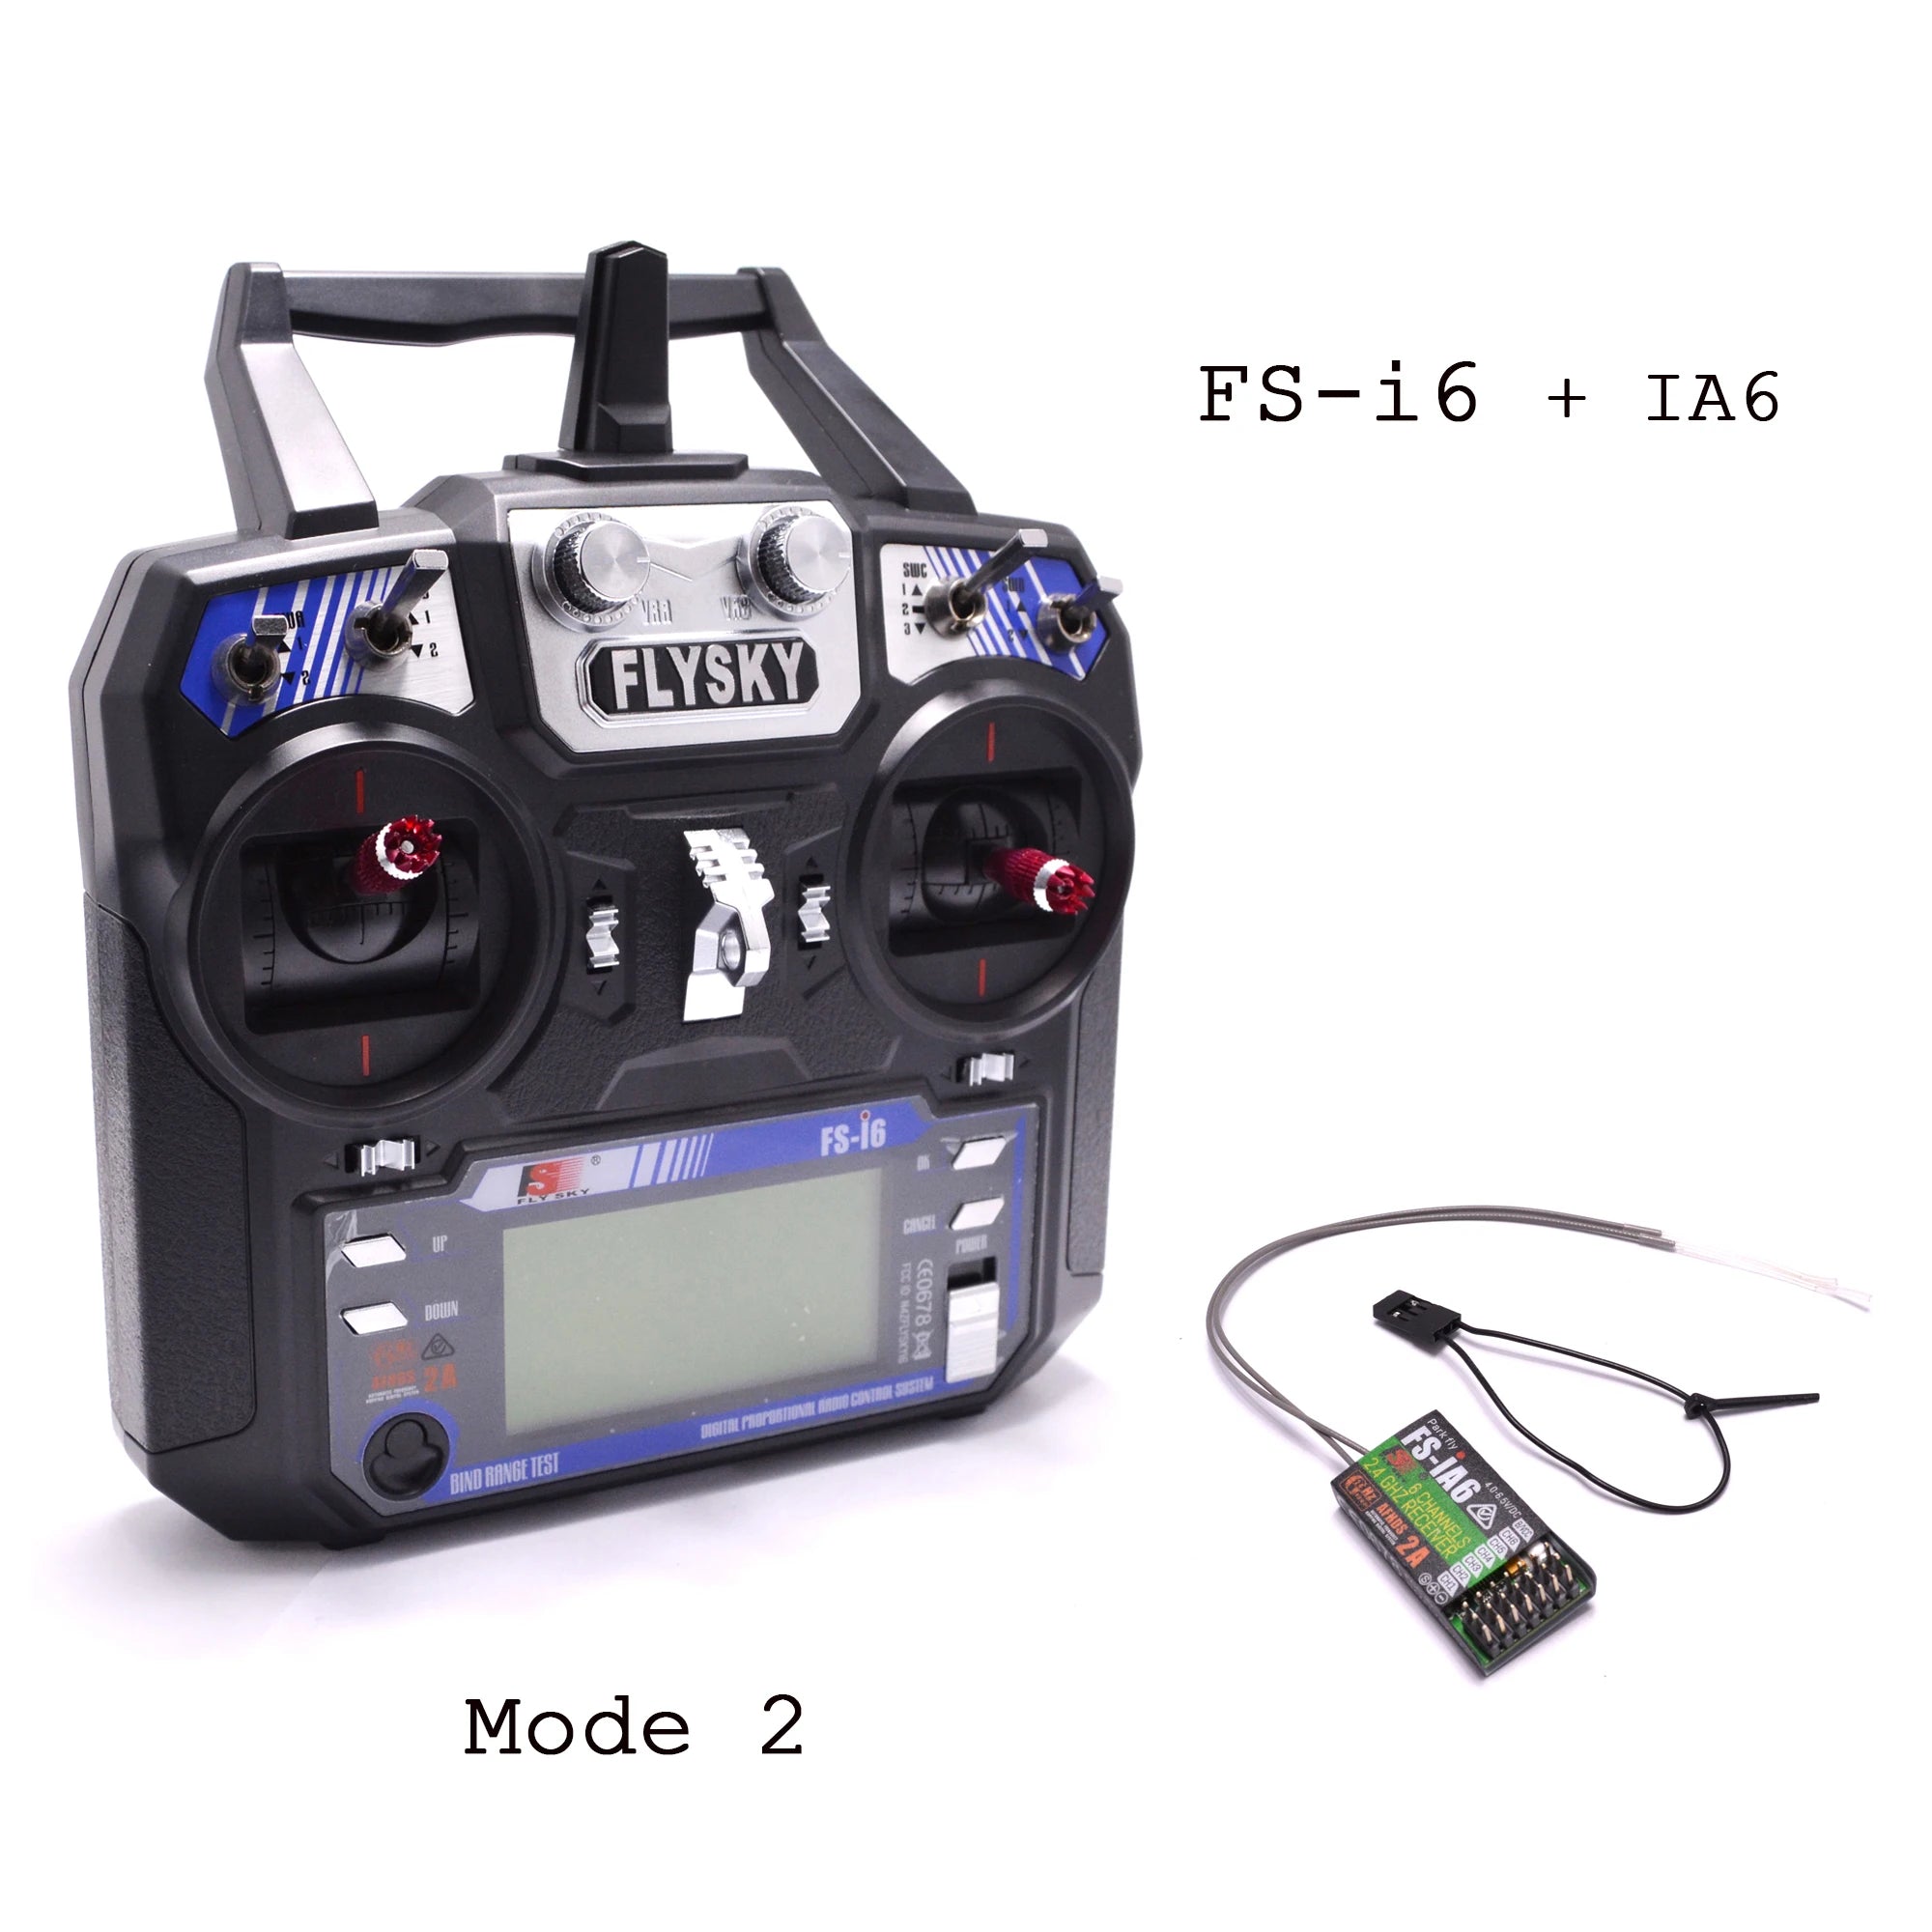 FS-i6 transmitter works in the frequency range of 2.405 - 2.4